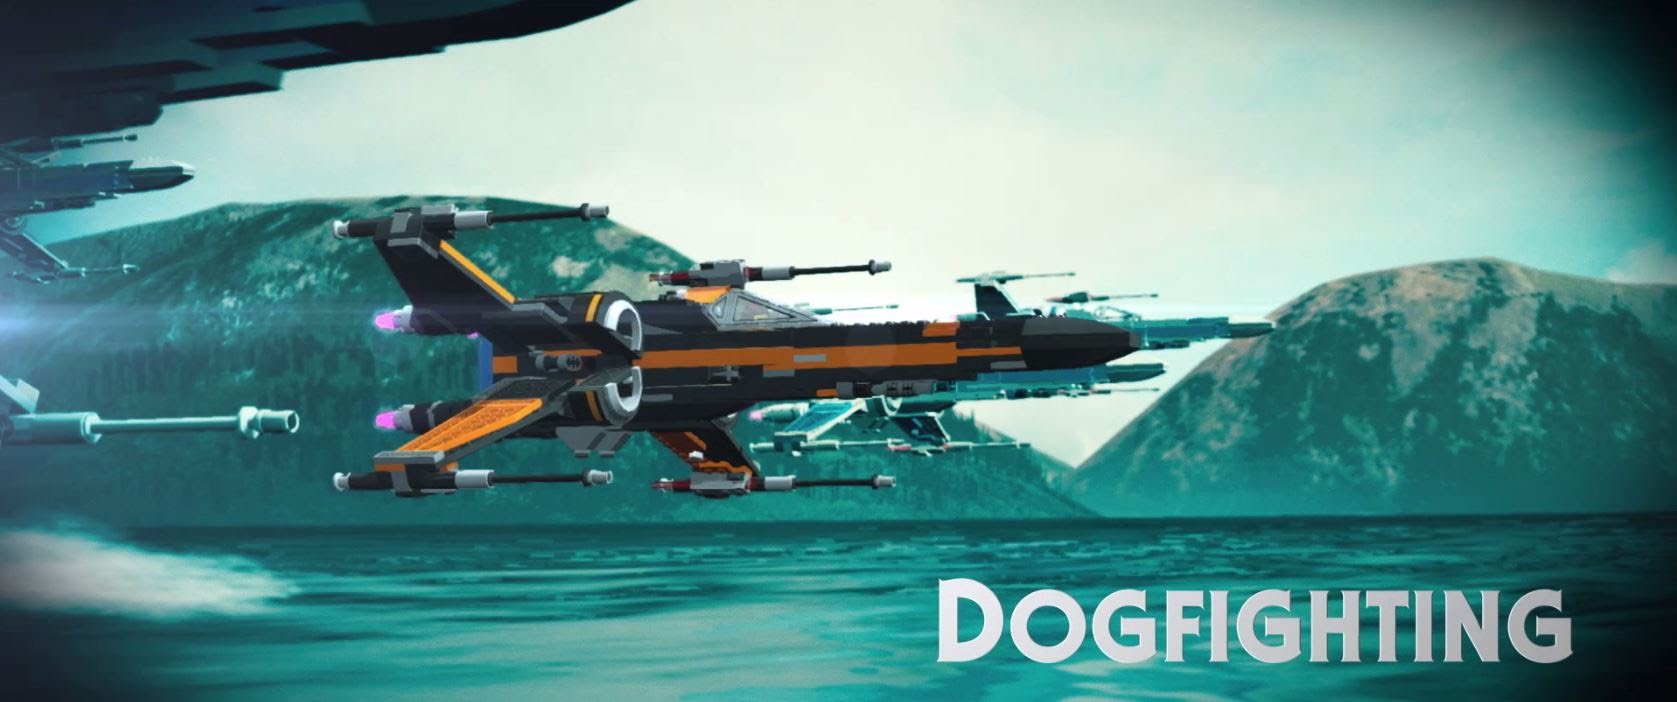 LEGO Star Wars: The Force Awakens | Dogfighting